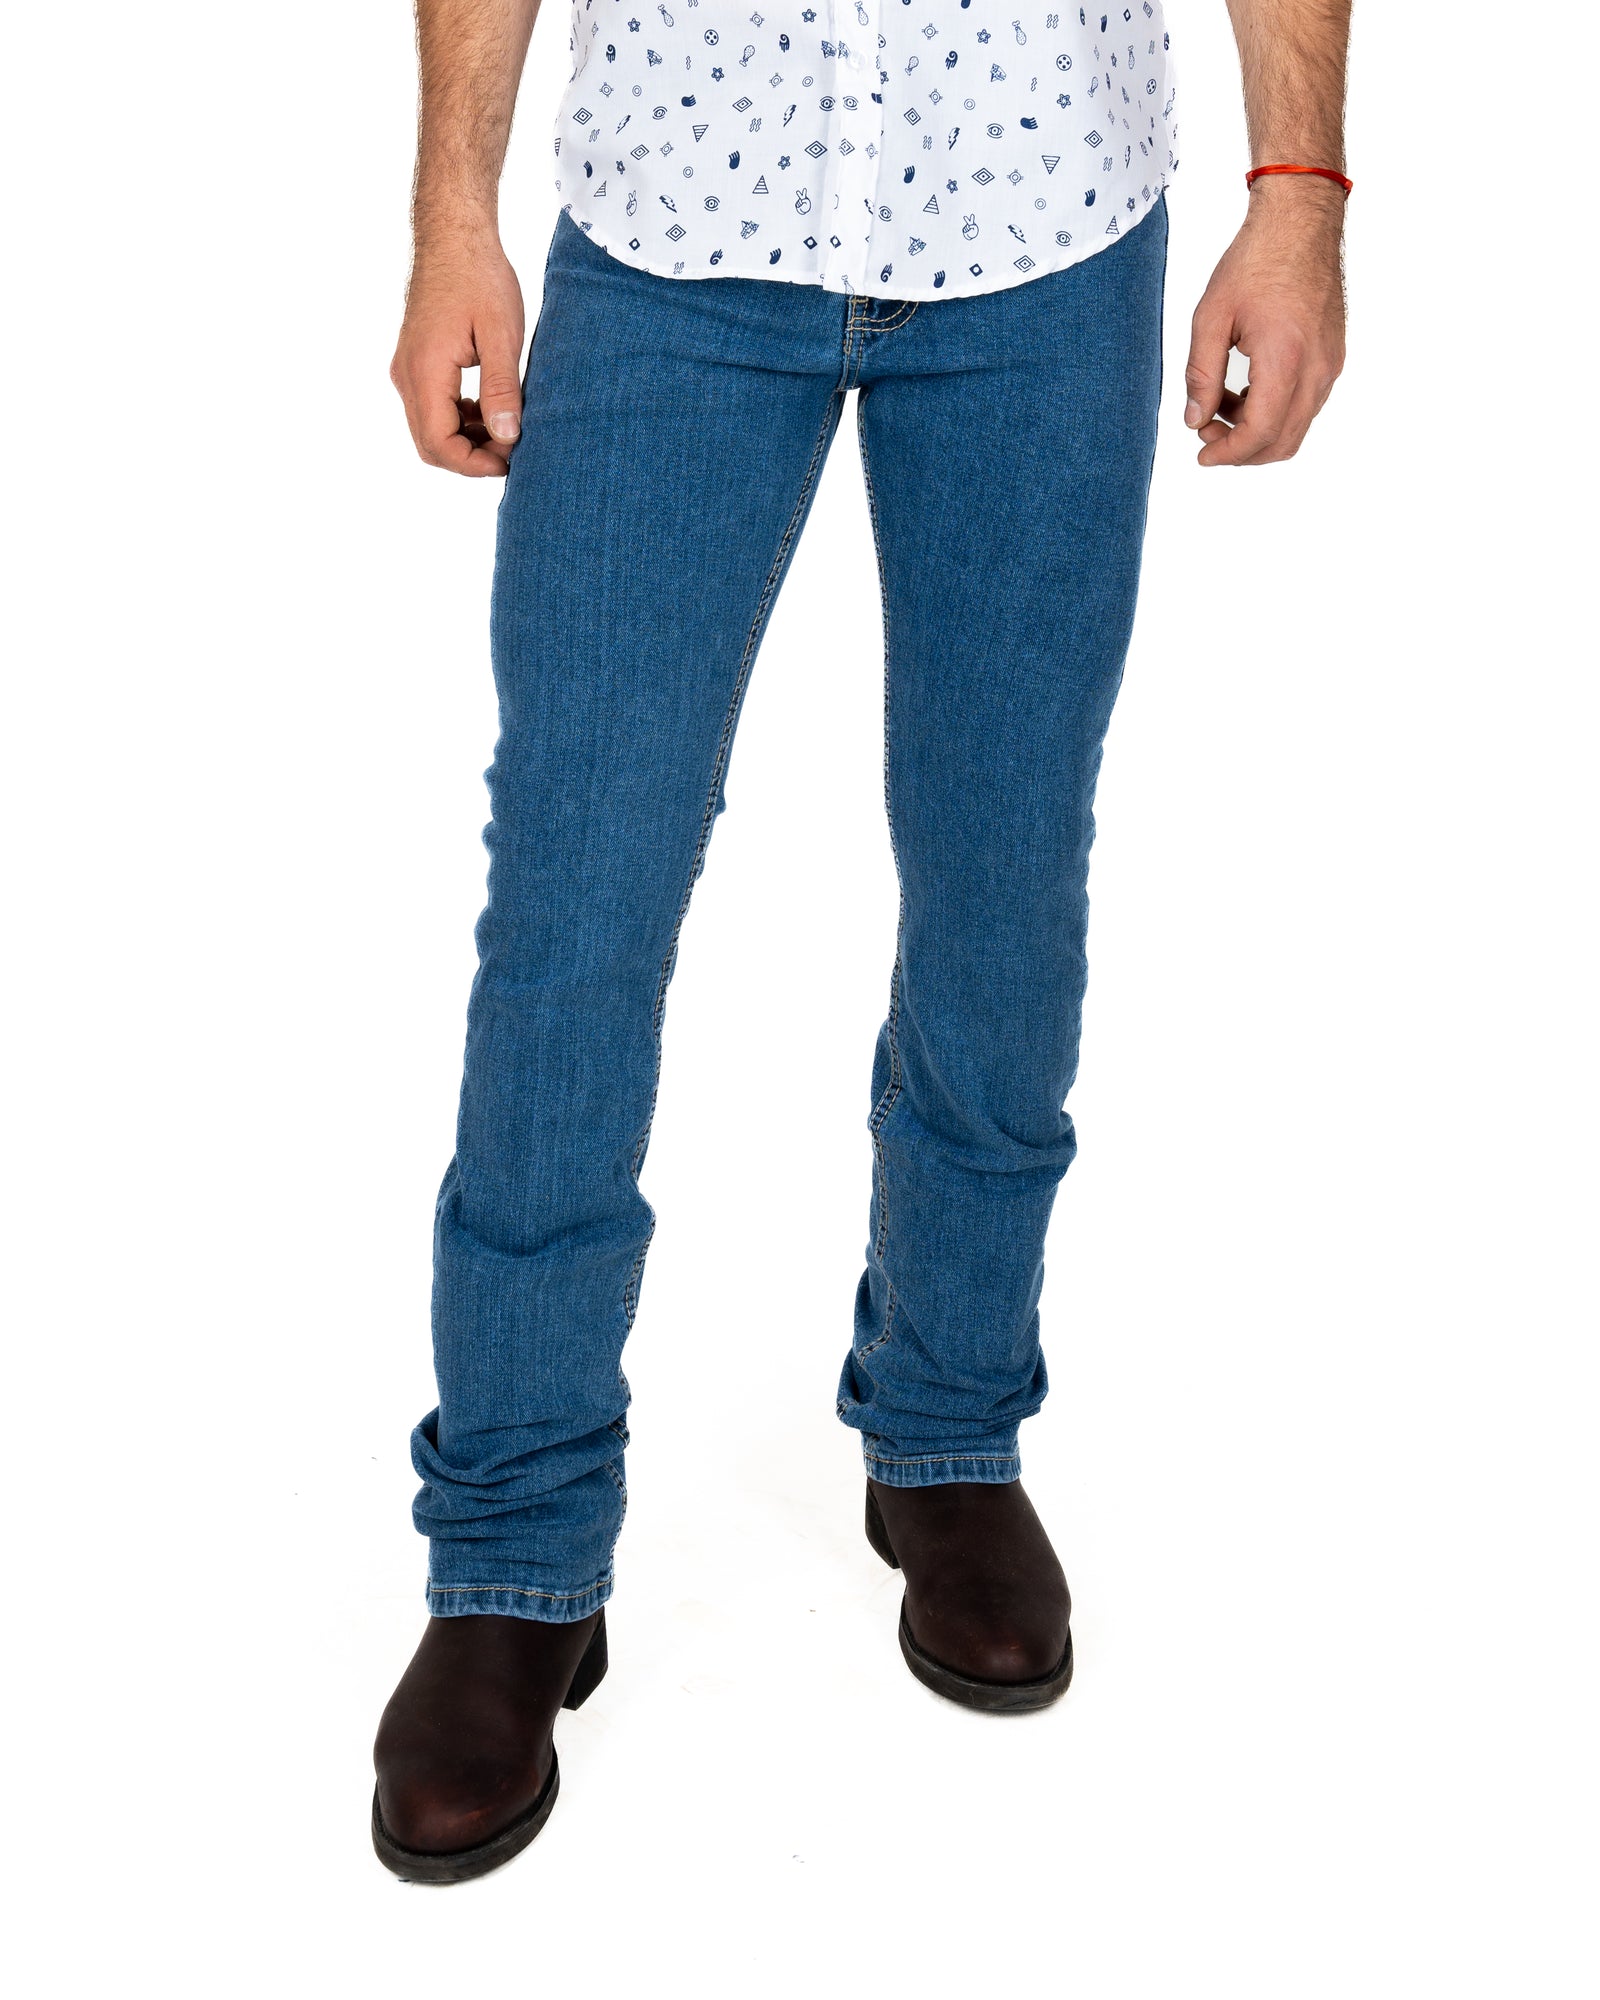 Jeans Rodeo West CB304 Caballero